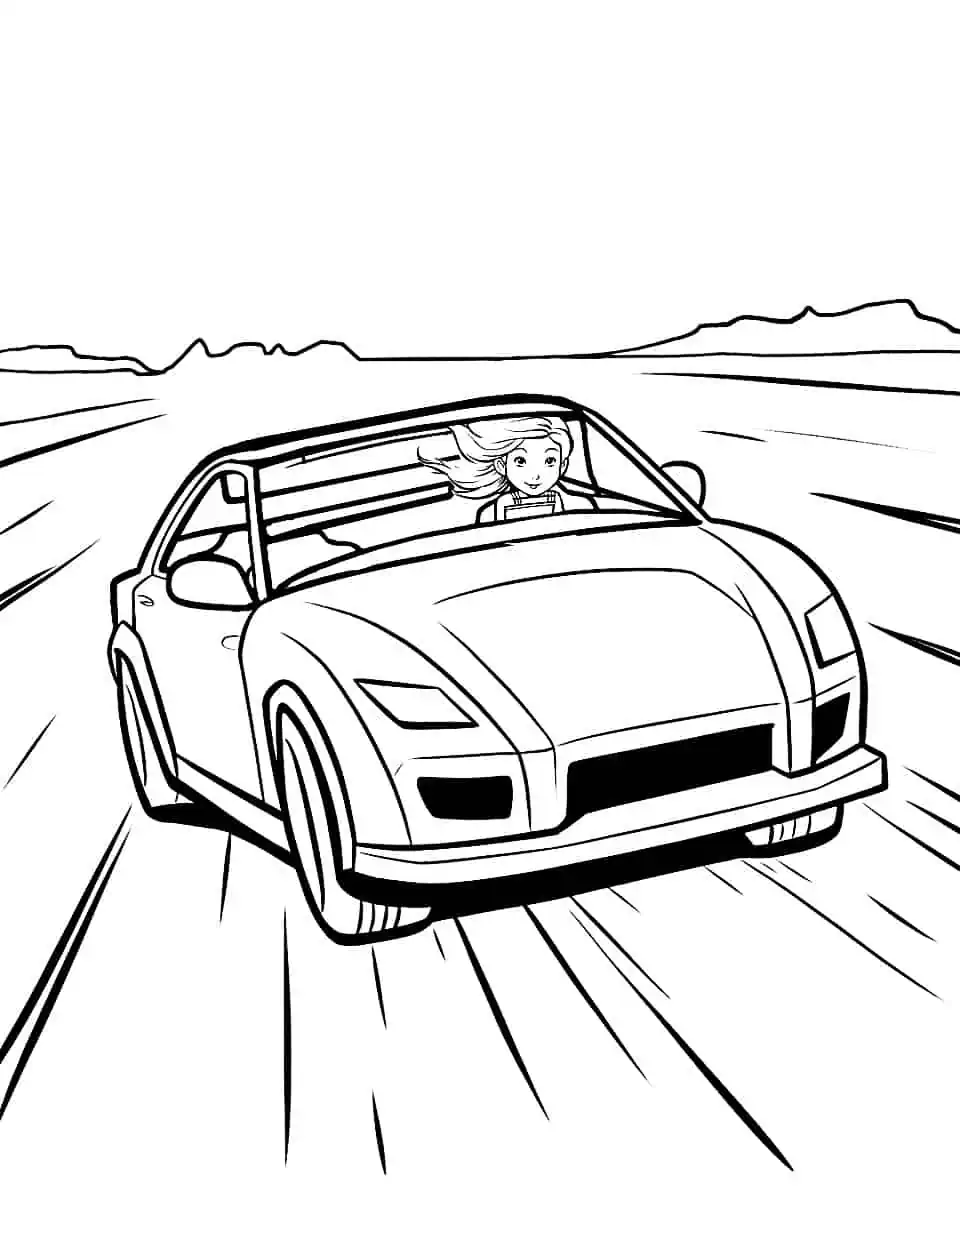 Determined Racer Car Coloring Page - A determined racer pushing toward the finish line.